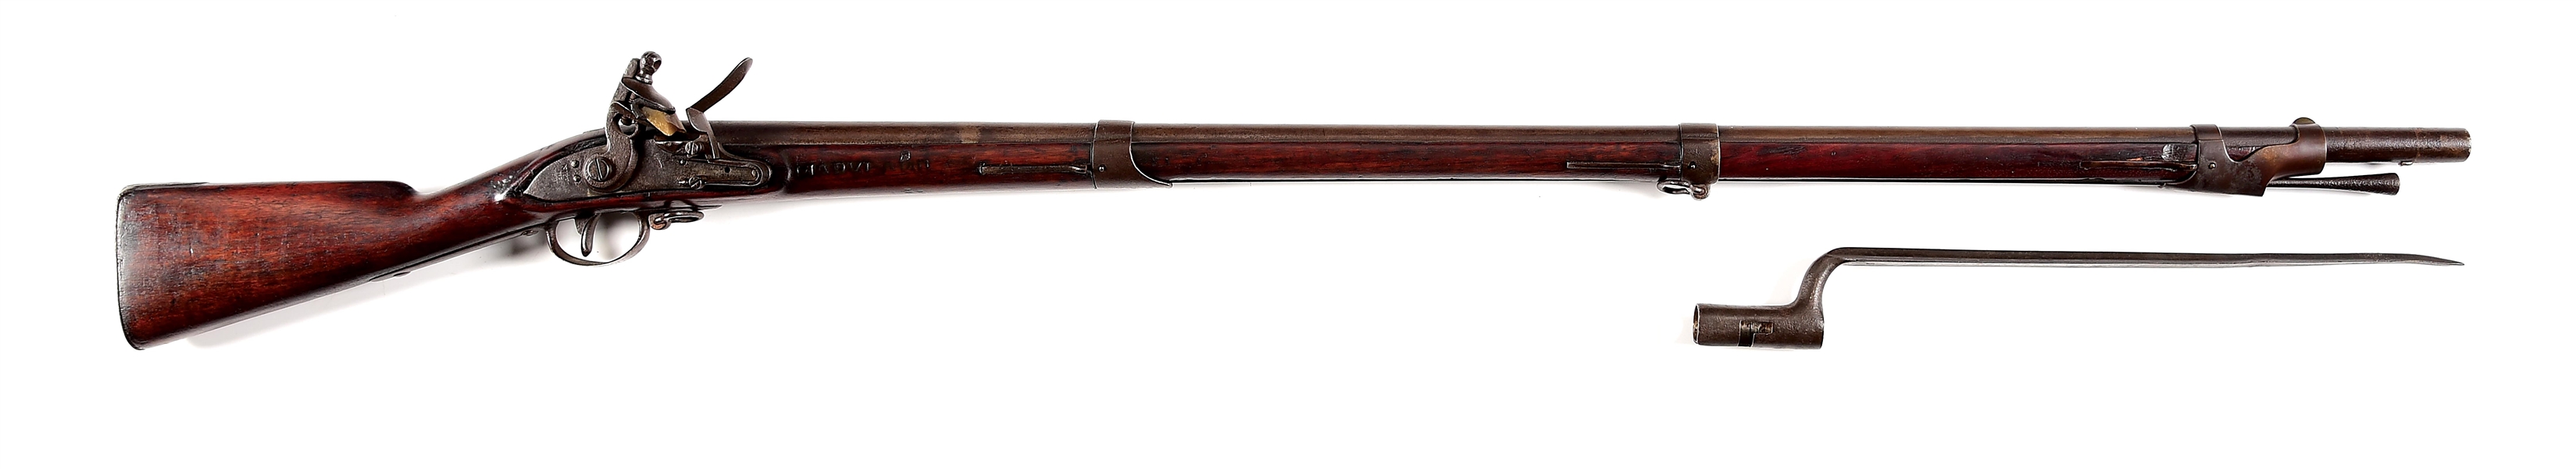 (A) IDENTIFIED AND MARYLAND MILITIA BRANDED WAR OF 1812 MODEL 1808 CONTRACT MUSKET BY NIPPES & CO., CARRIED BY THOMAS PILKERTON.